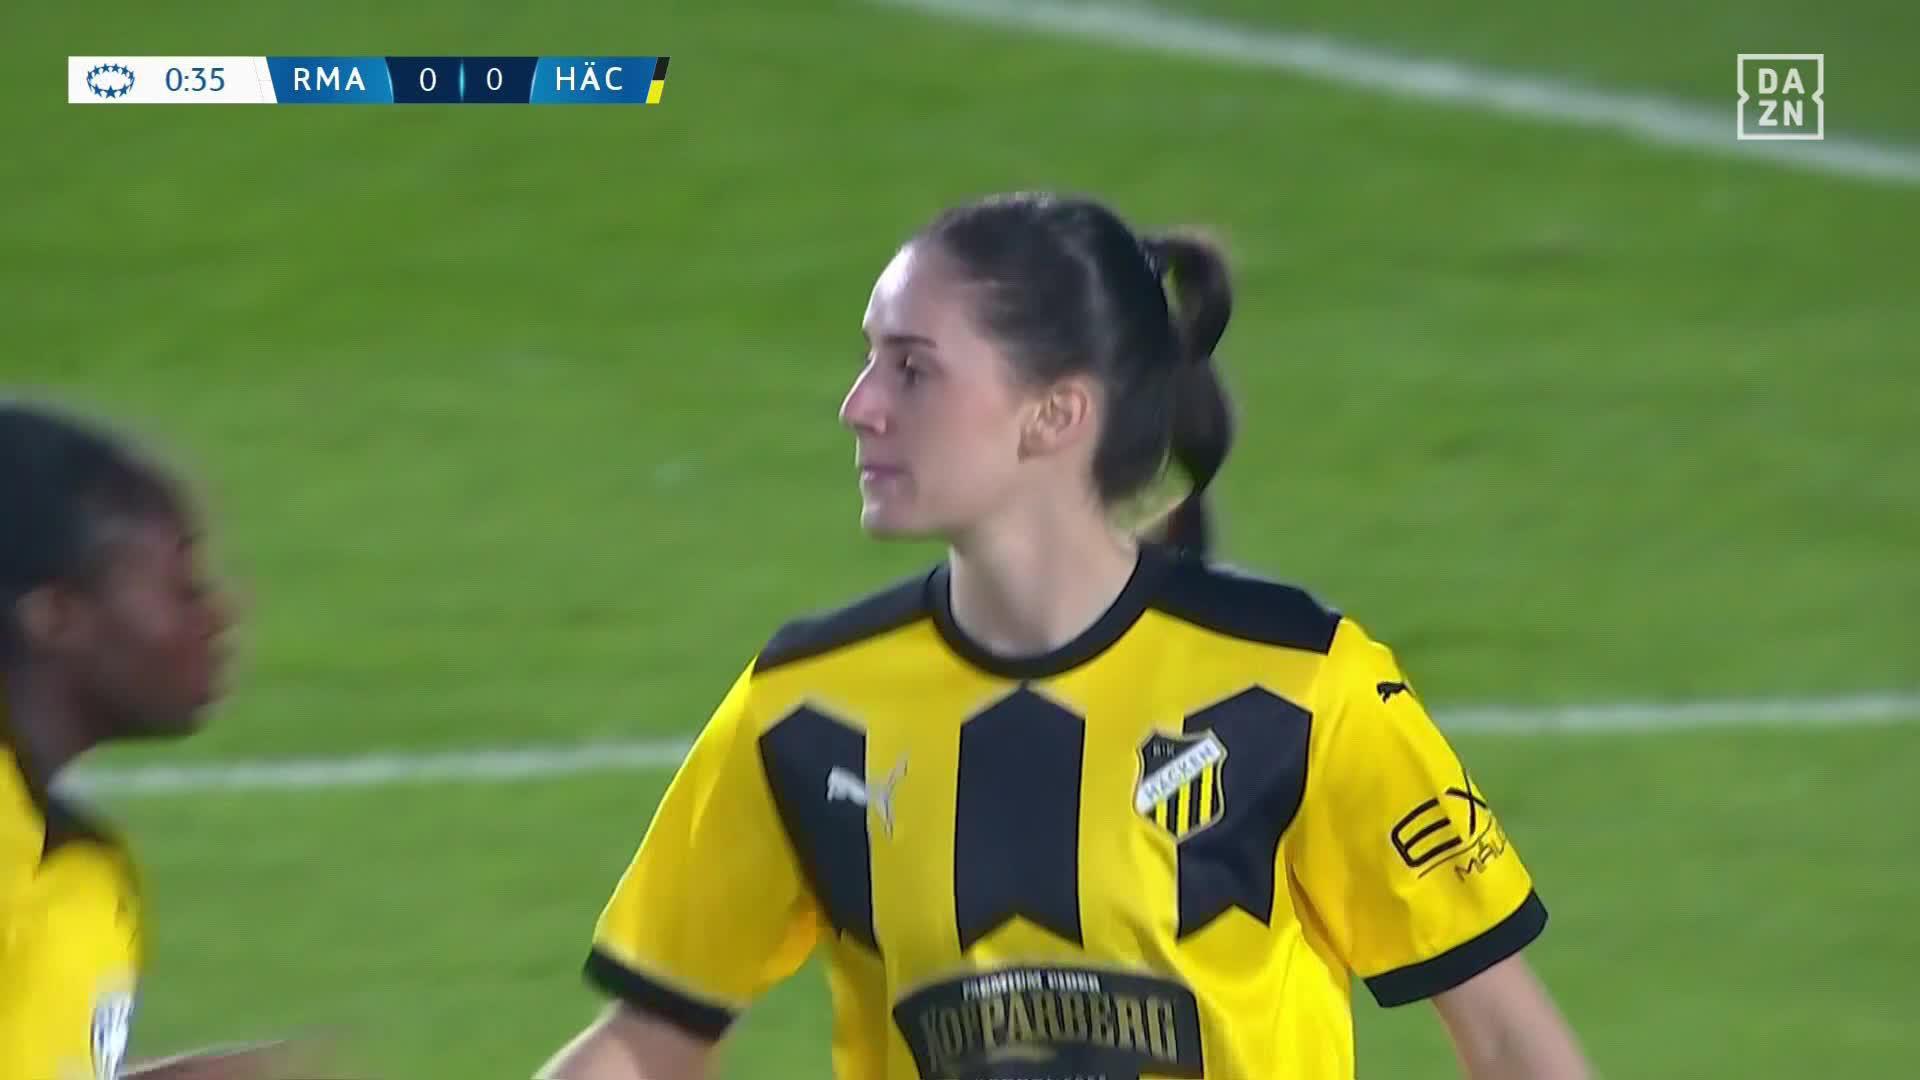 BIG CHANCE... Clarissa Larisey MISSES a golden opportunity to give Hacken the dream start. 😬Watch the UWCL LIVE for FREE on DAZN 👉  #UWCLonDAZN